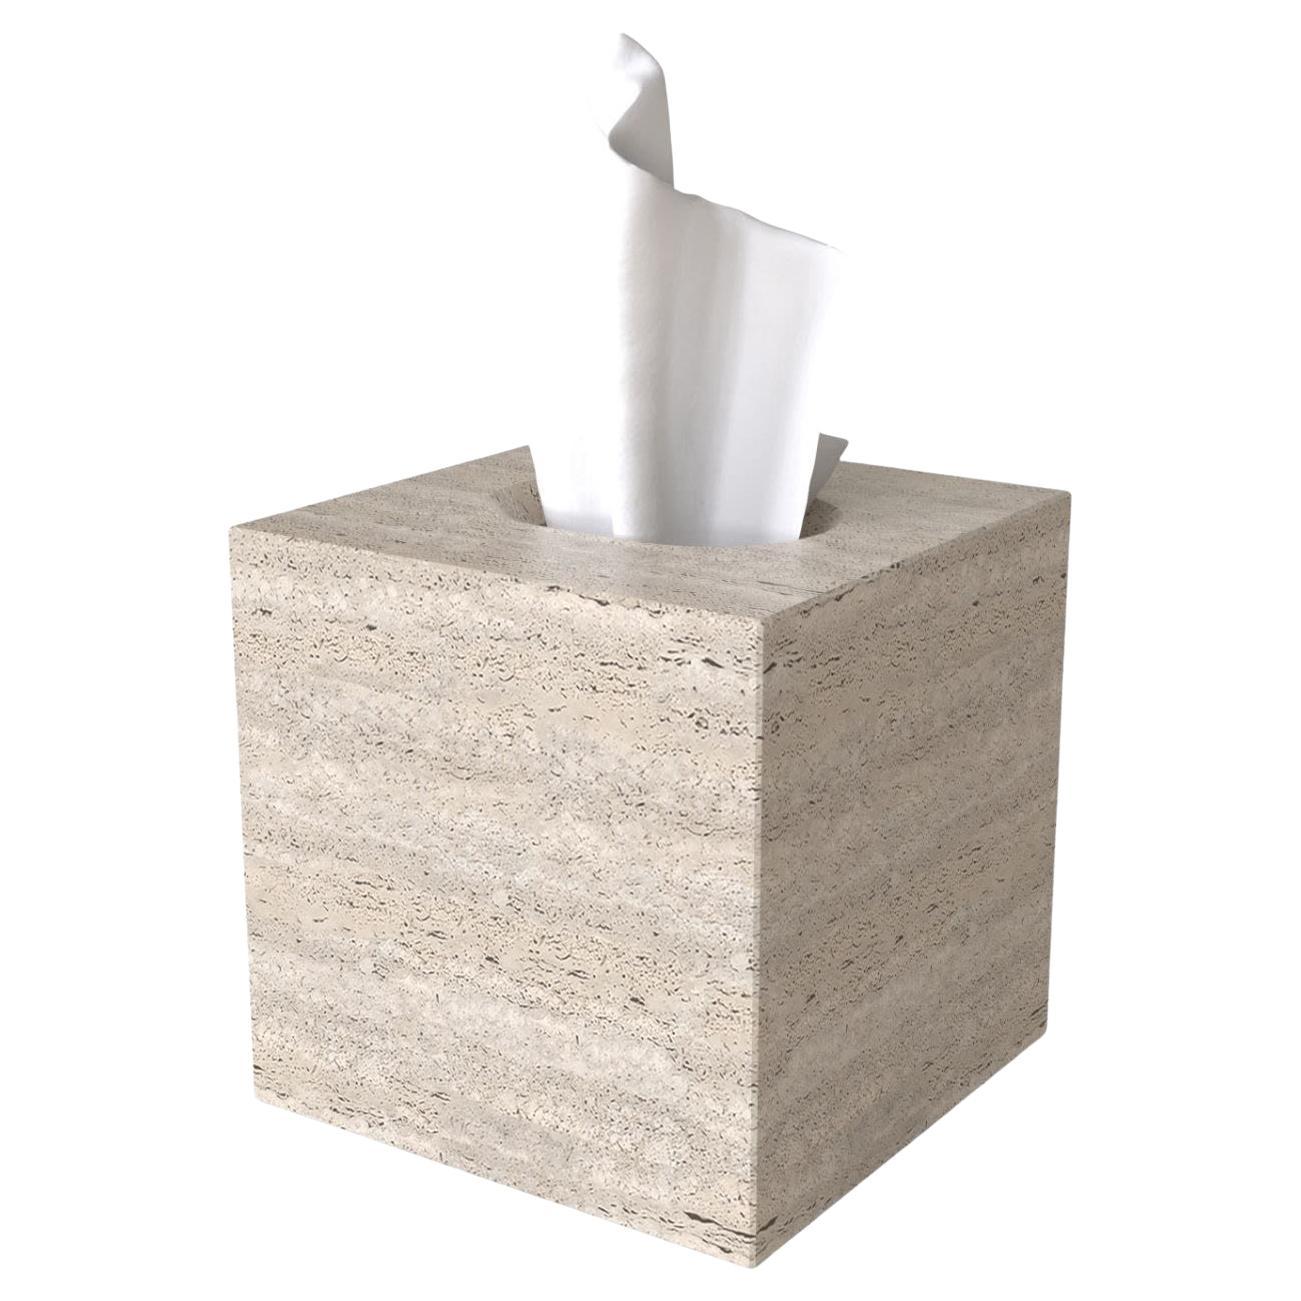 Mexican Kleenera White Marble Tissue Holder For Sale